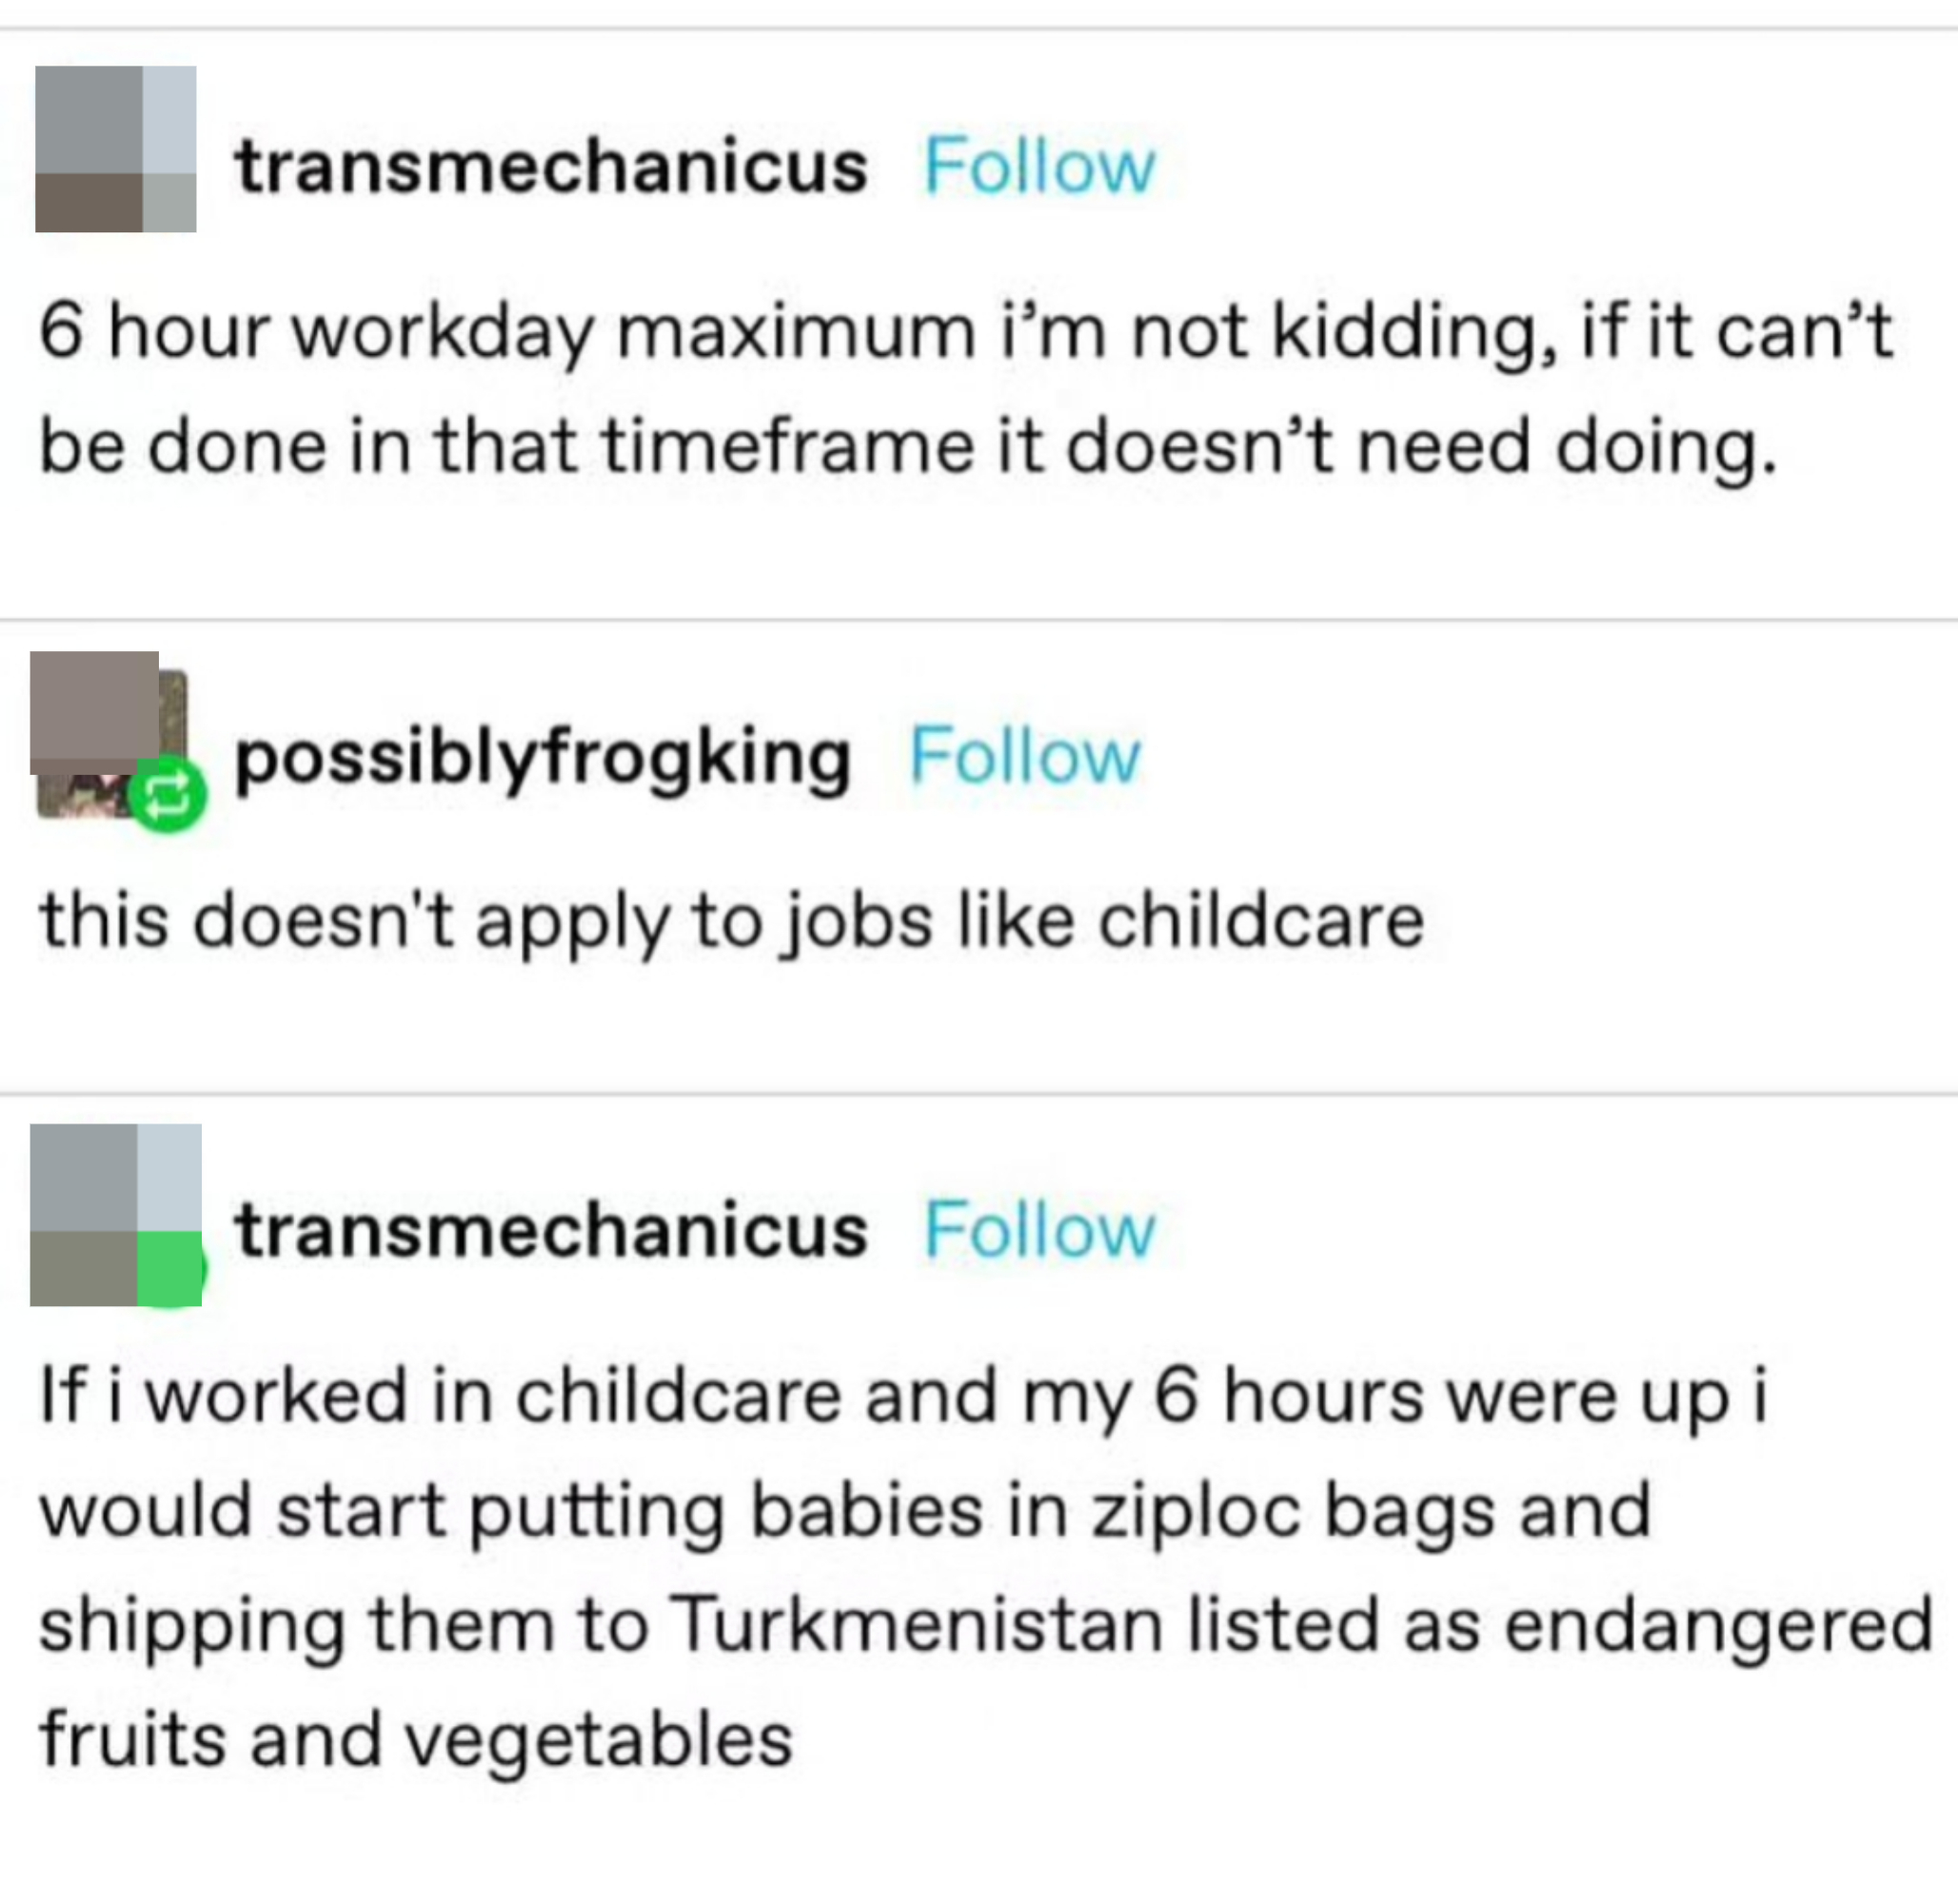 &quot;If i work in childcare and my 6 hours were up...&quot;